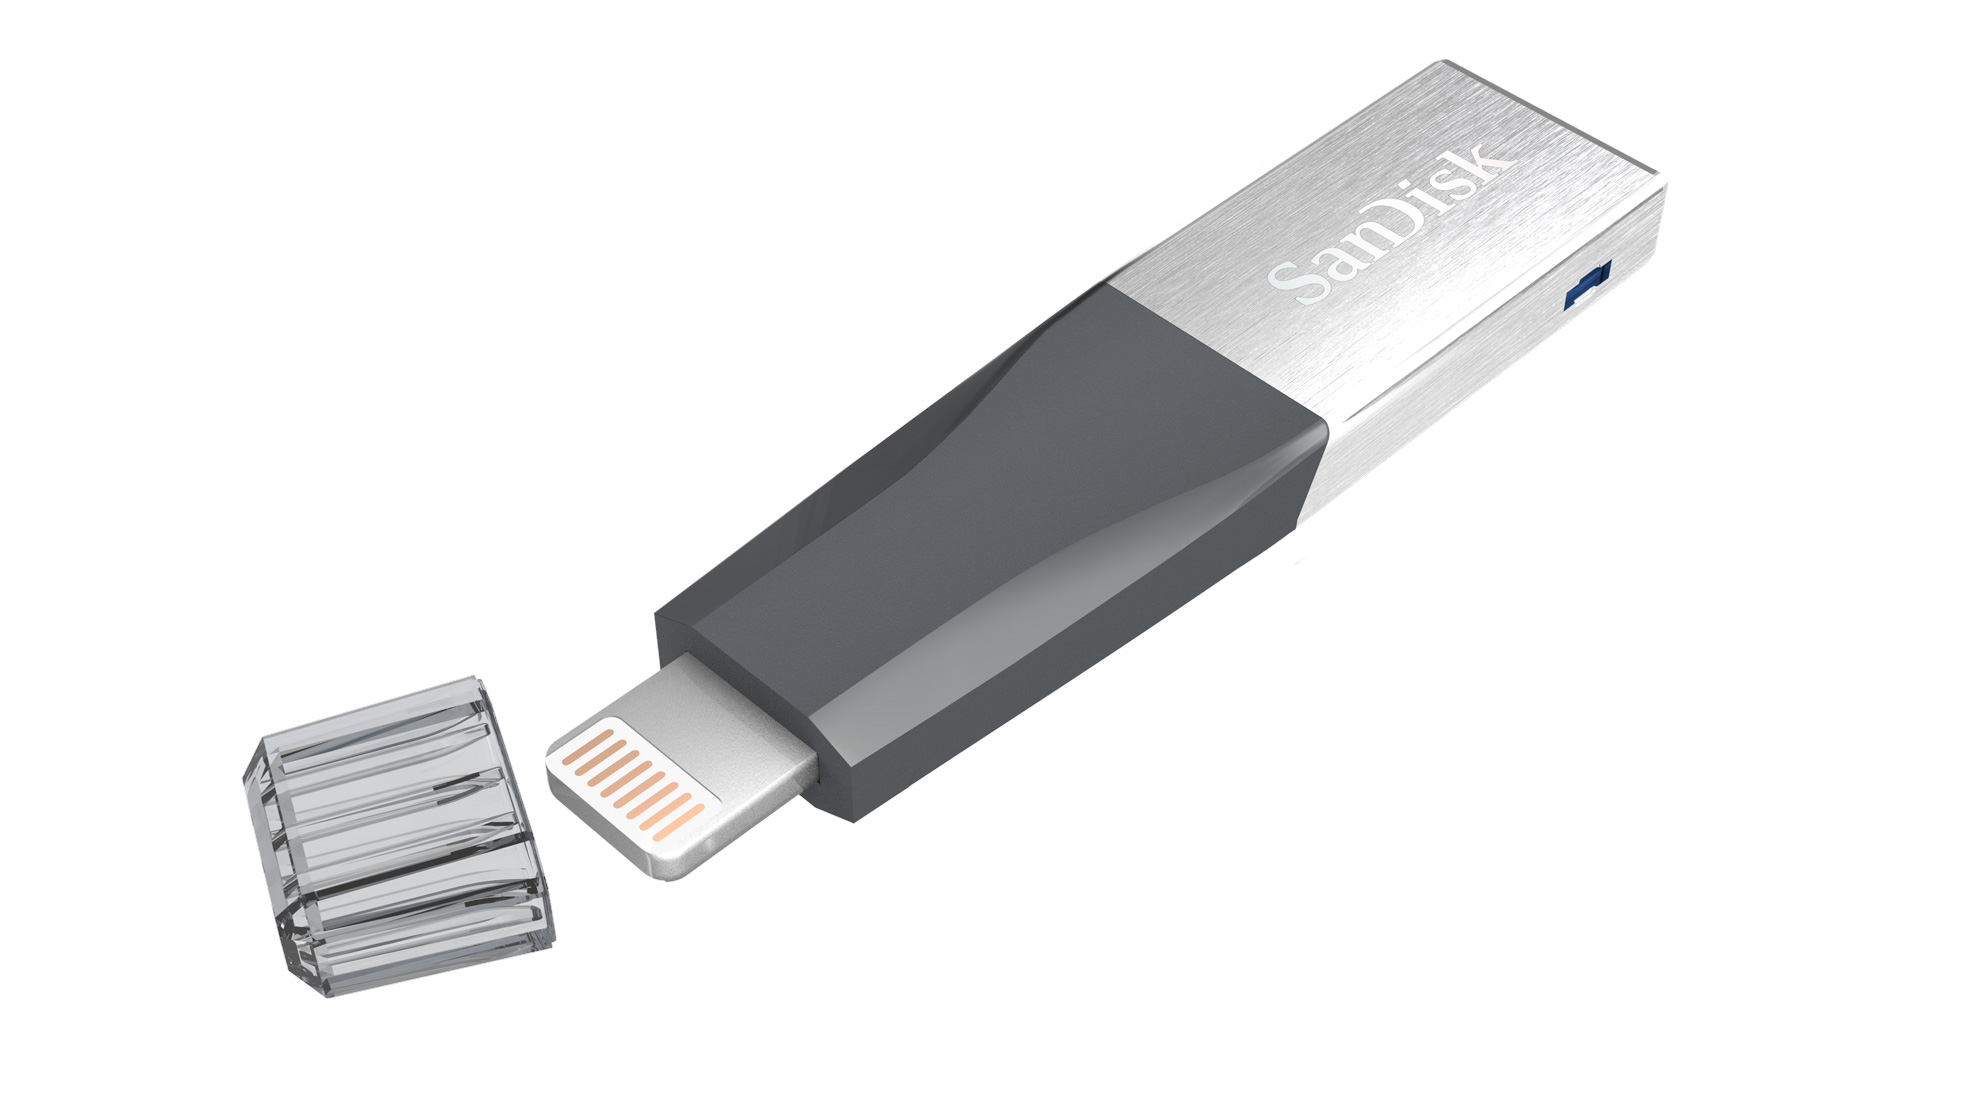 SanDisk iXpand Mini flash drive for iPhone and iPad launched in India, price starts at Rs 2,750